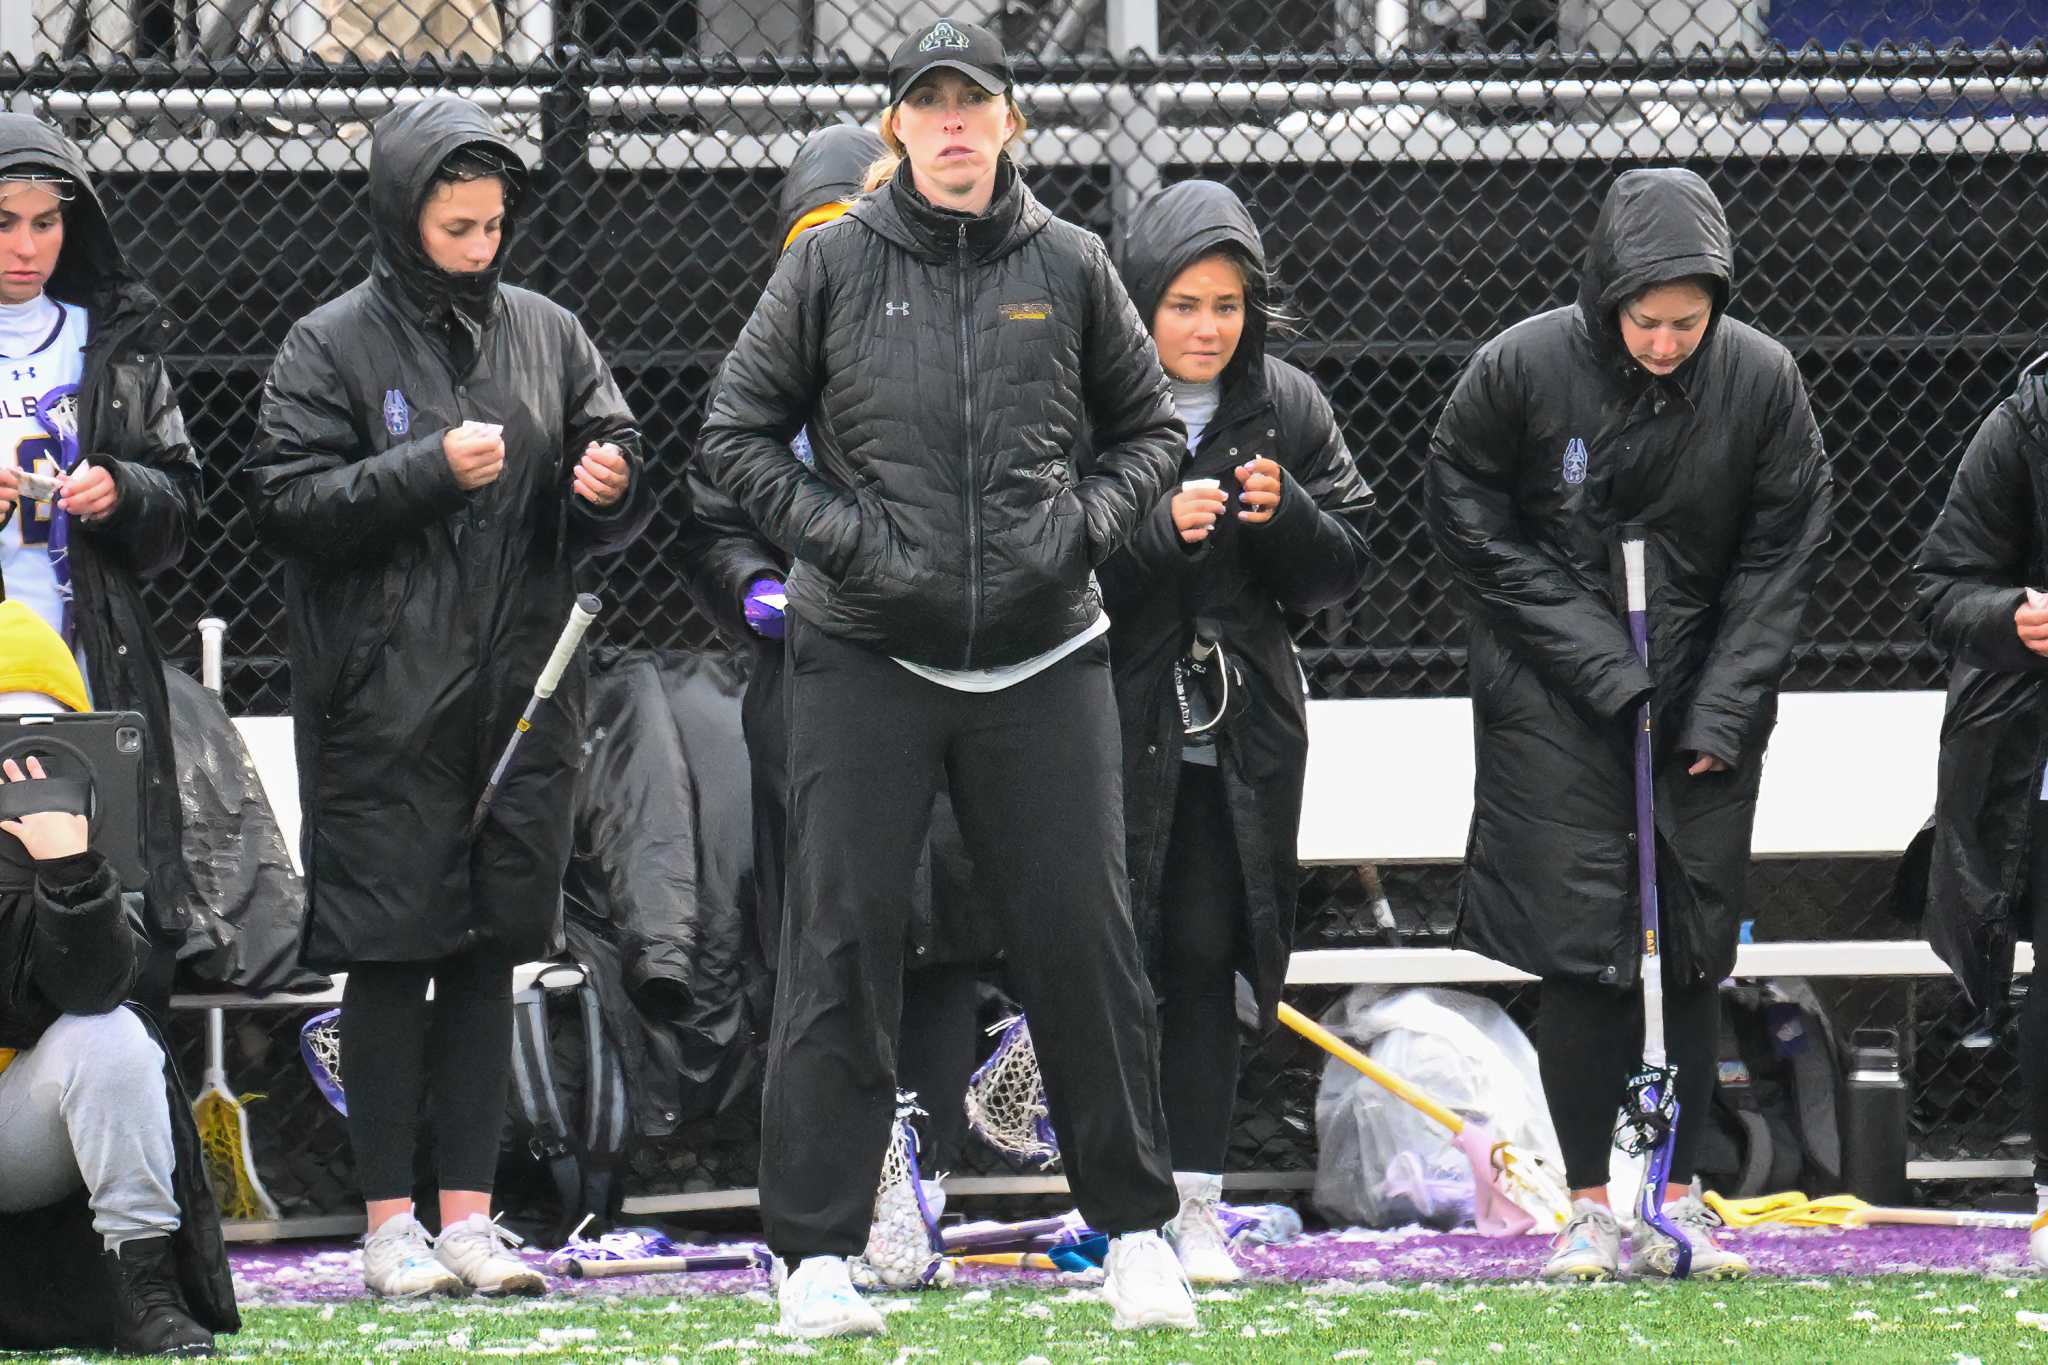 UAlbany women’s lacrosse is battle-tested entering Virginia match